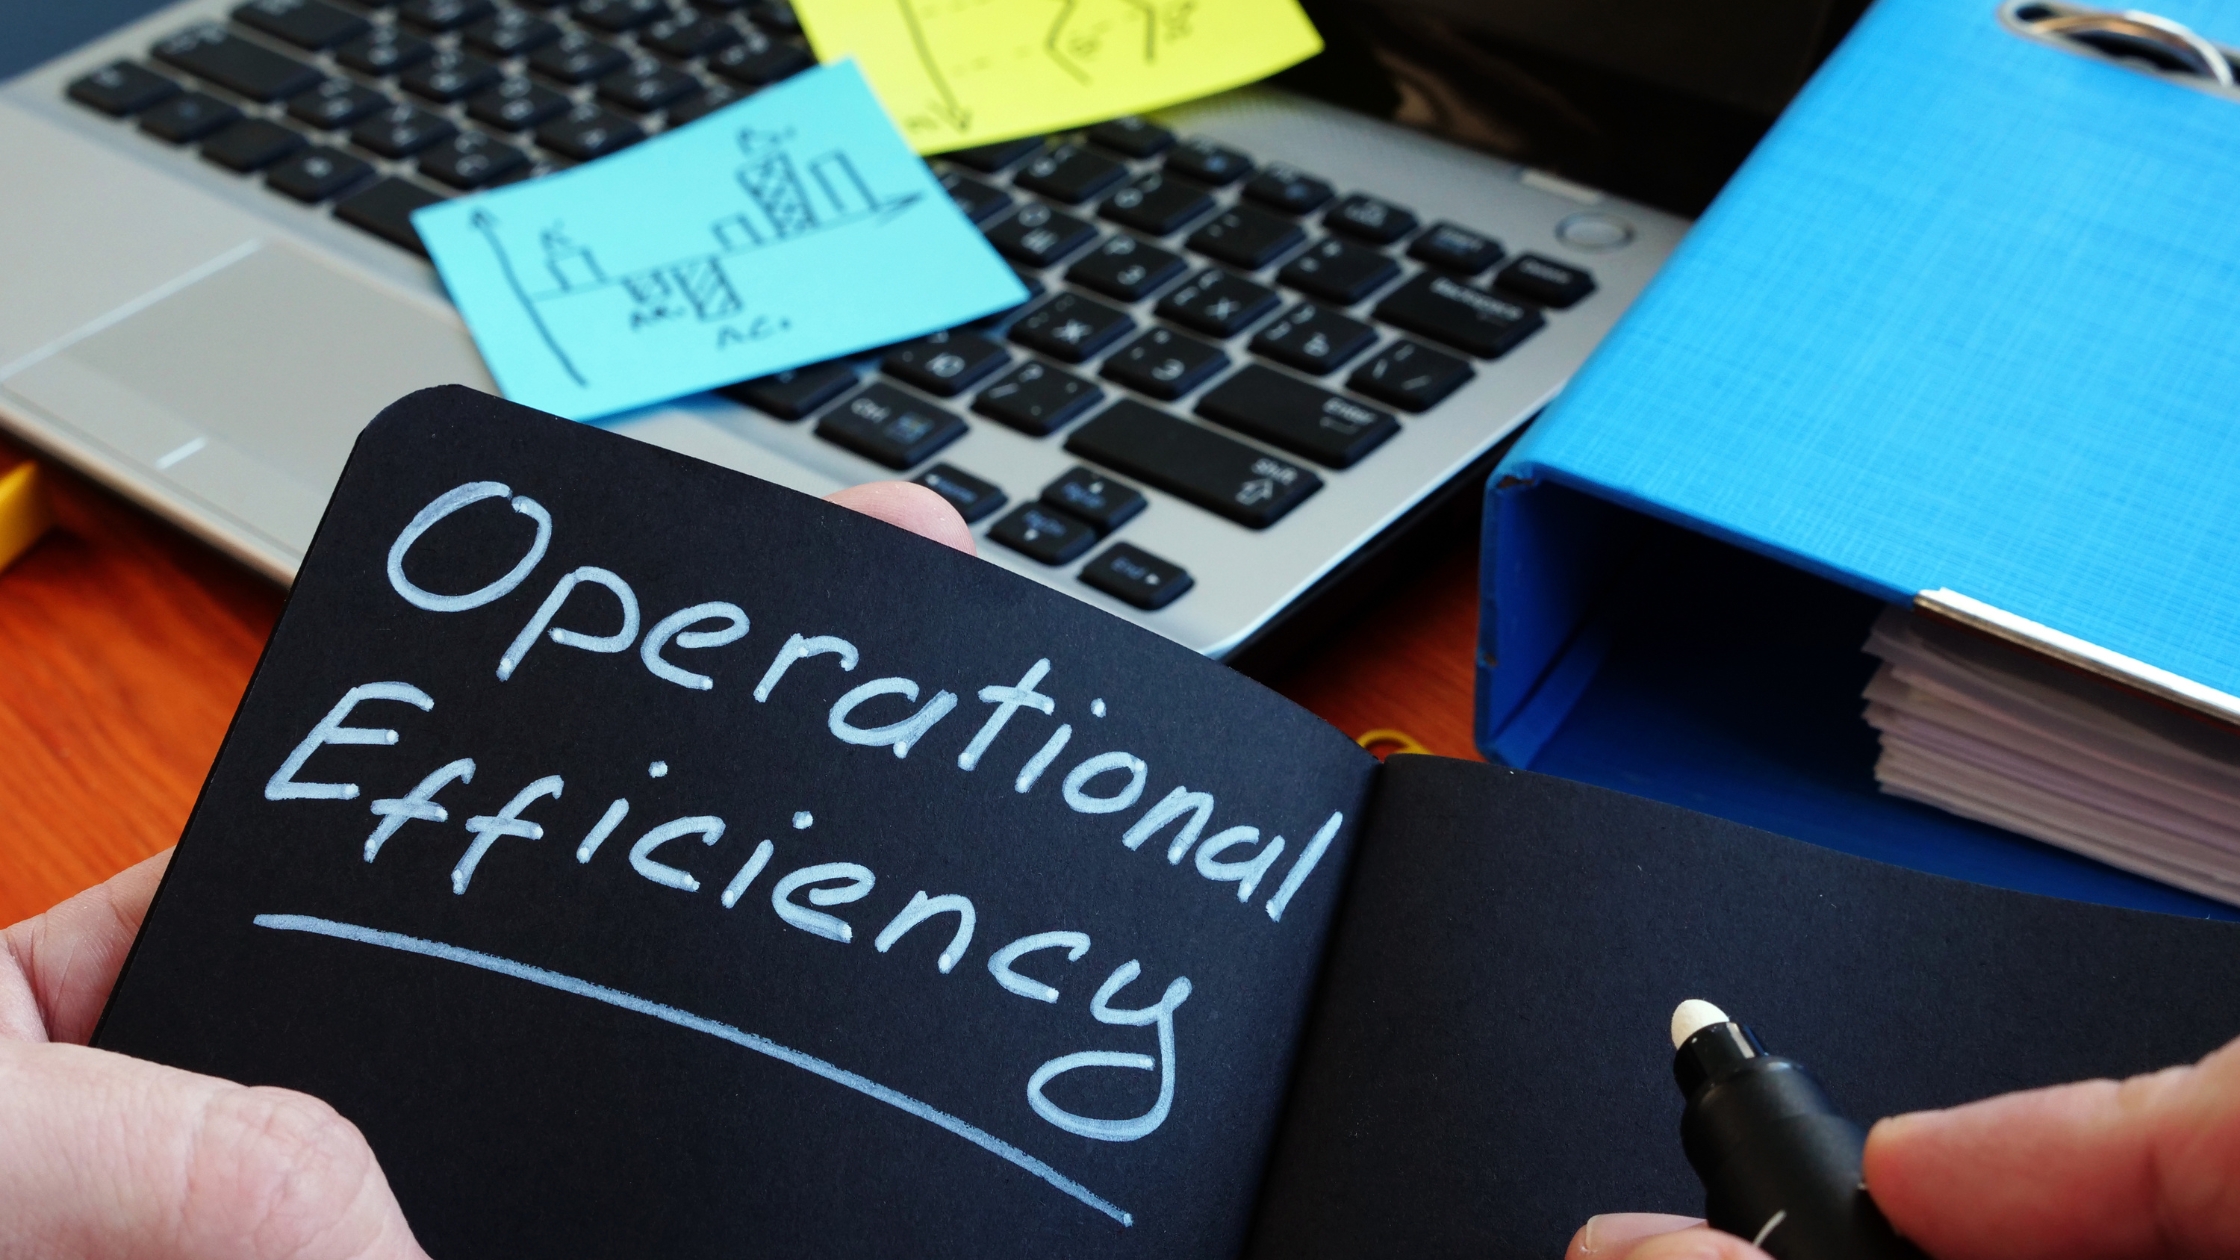 Streamline your operations: Close-up of notebook page titled "Operational Efficiency"